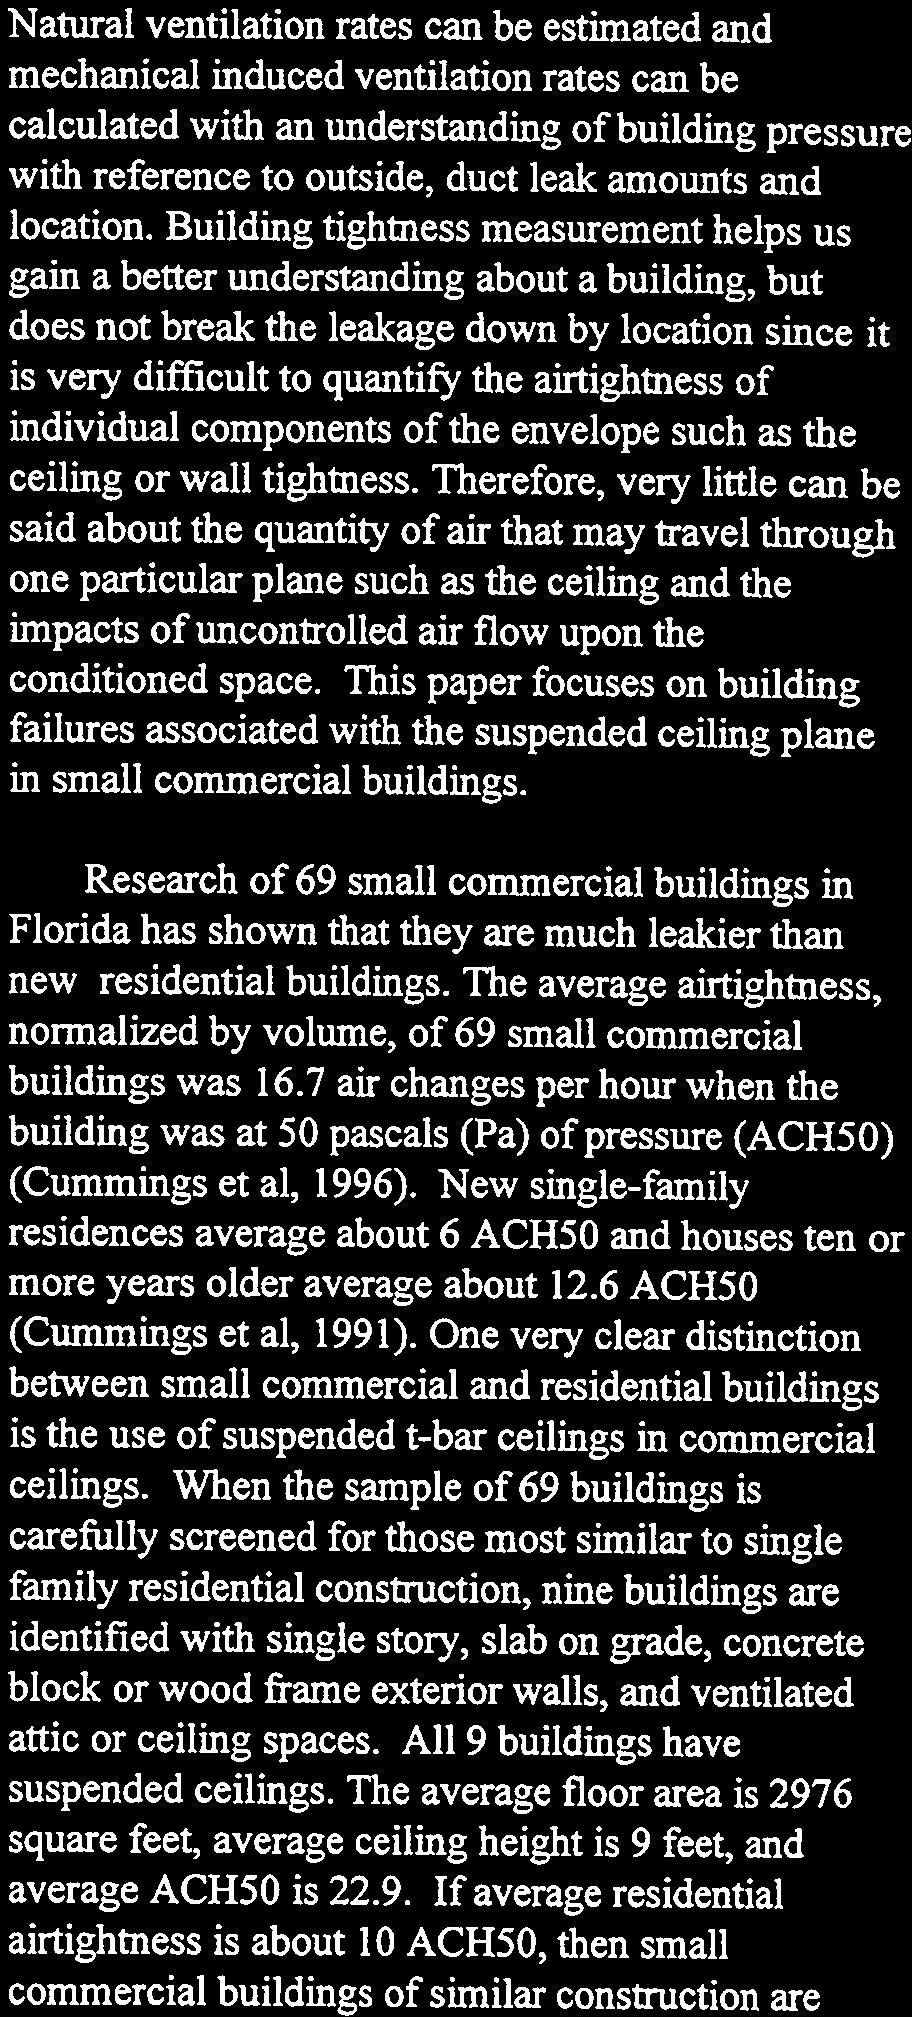 Building Envelope Air Leakage Failure in Small Commercial Buildings Related to the Use of Suspended Tile Ceilings Charles R. Withers, Research Analyst James B.